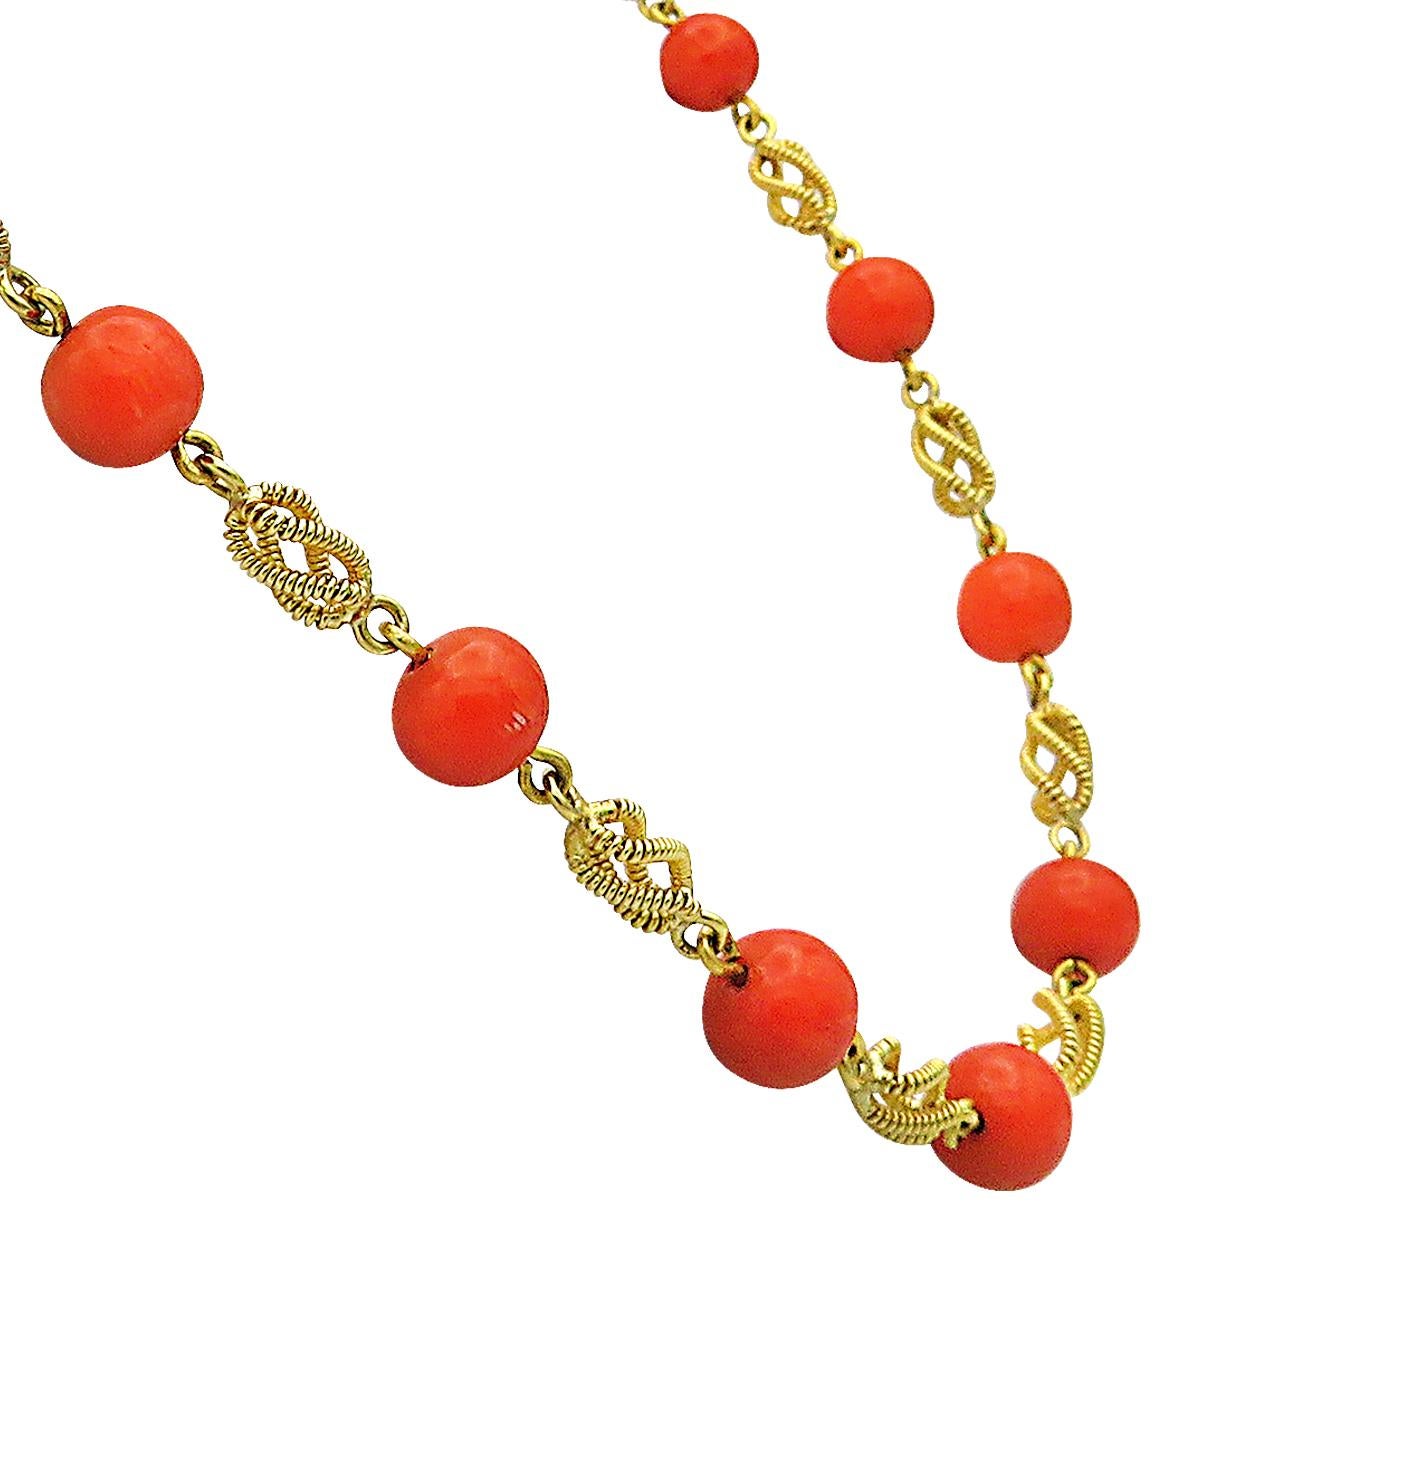 One of a kind Italian Coral necklace and Lapis Lazuli necklace featuring 18k gold swirls connecting 7.8 mm to 8.7 mm Italian coral beads and lapis lazuli beads. Total length of the Italian red coral necklace is 30 inches. Total length of the blue